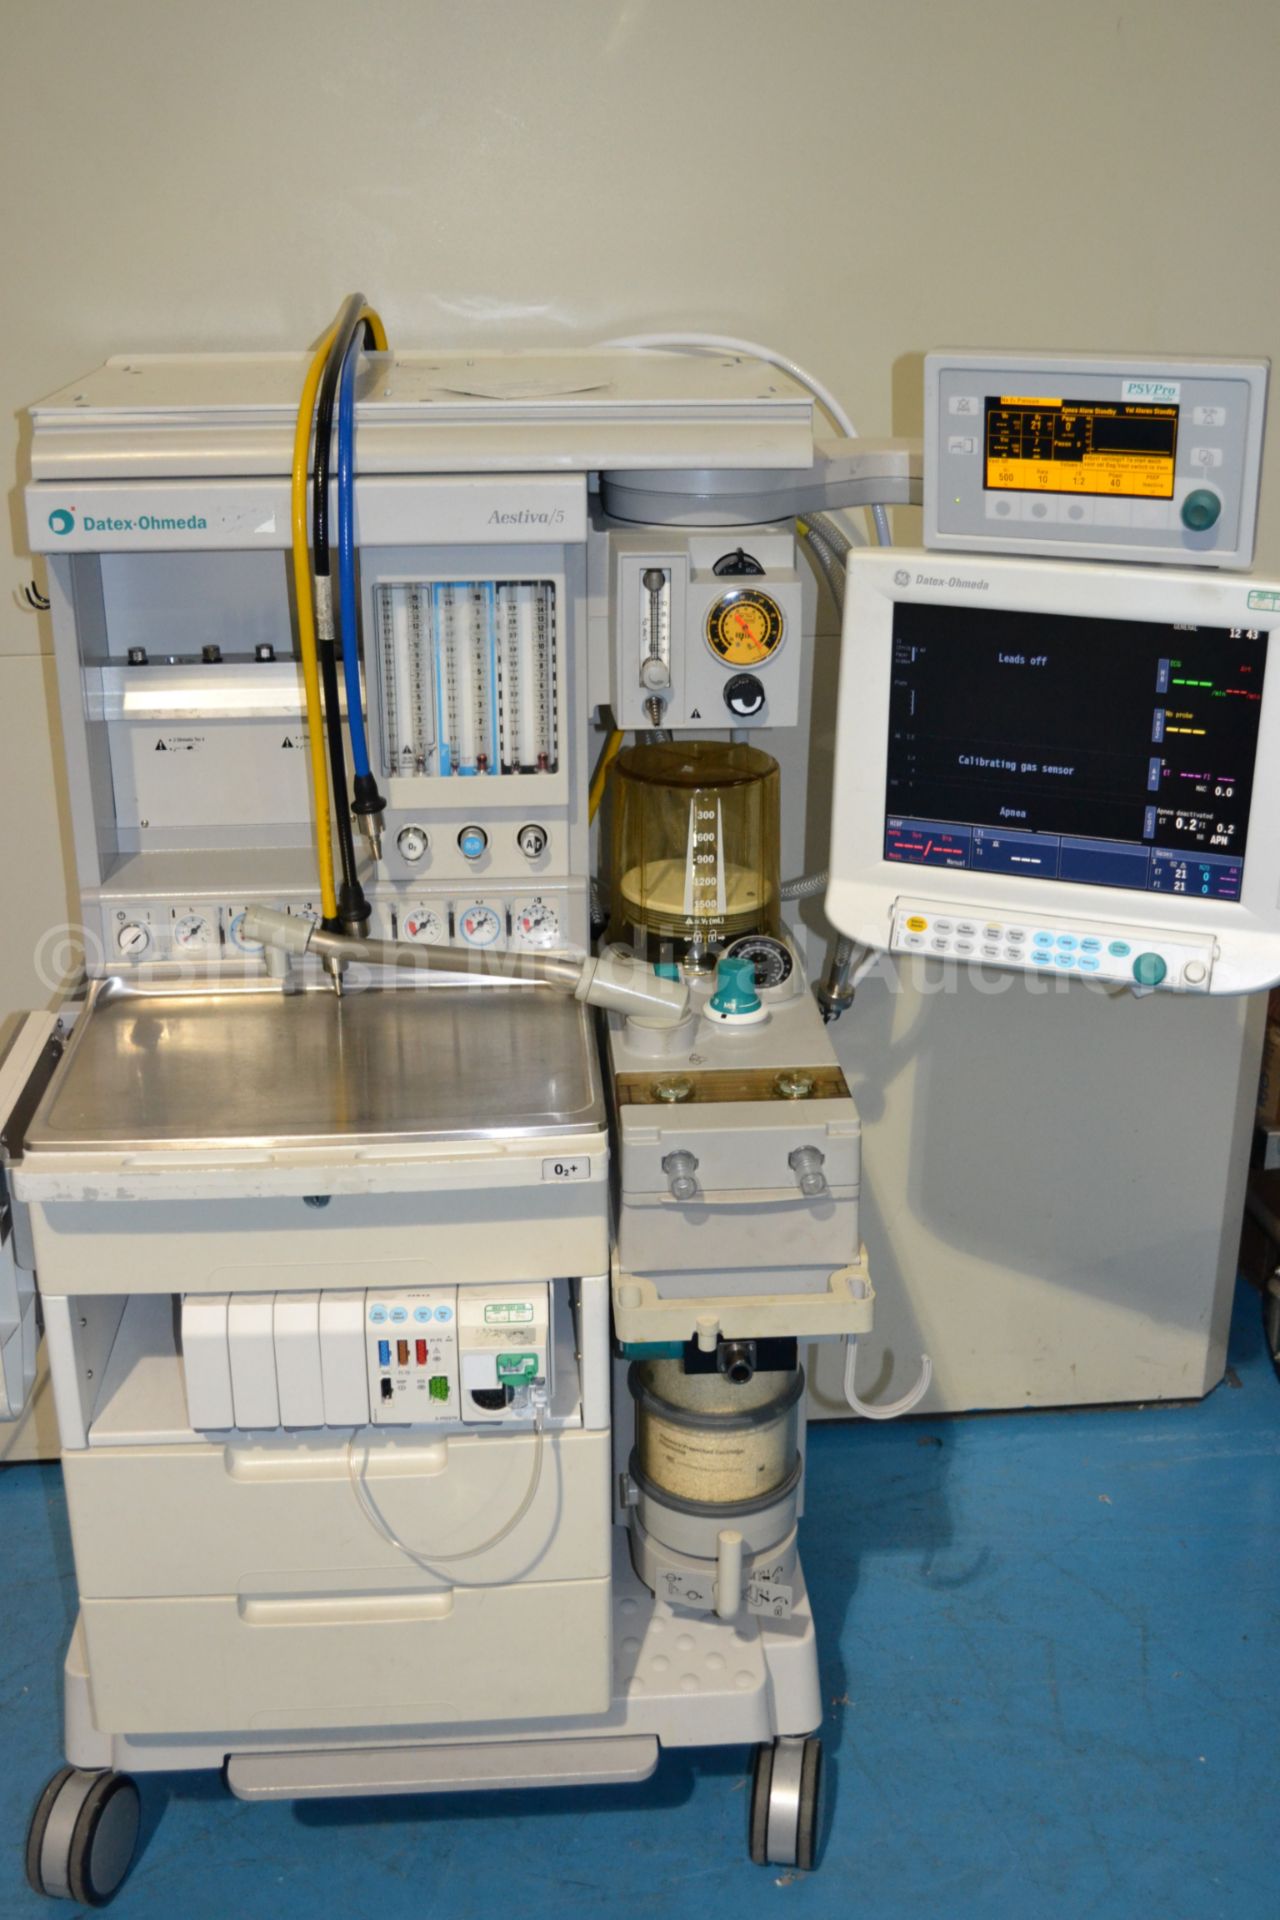 Datex Ohmeda Aestiva/5 Anaesthesia System with Aes